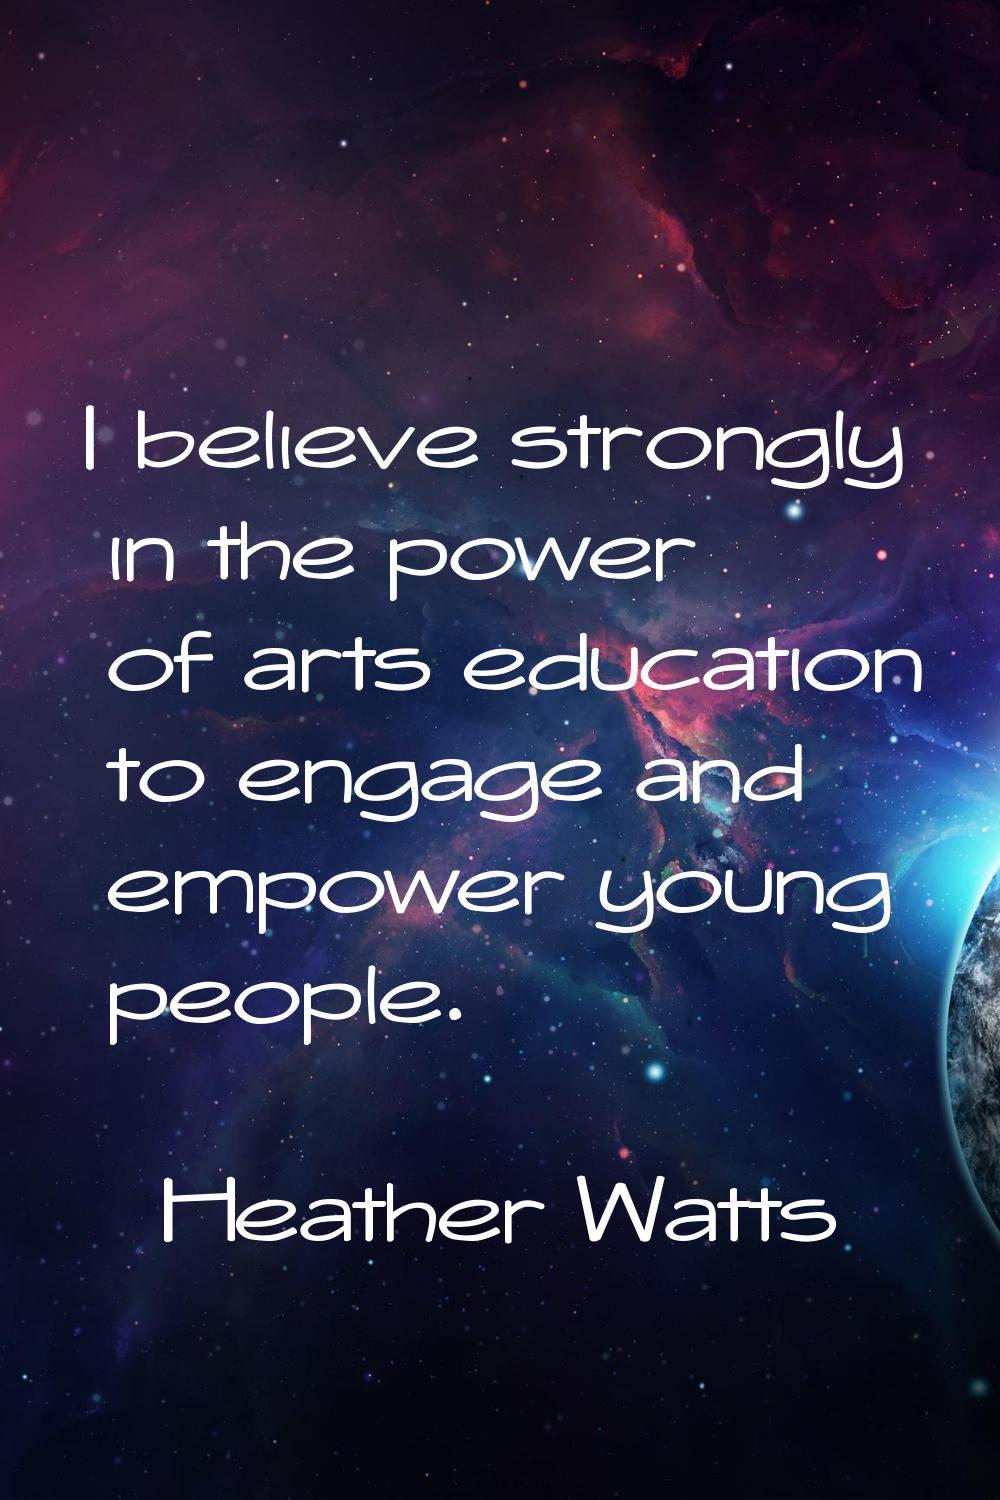 I believe strongly in the power of arts education to engage and empower young people.